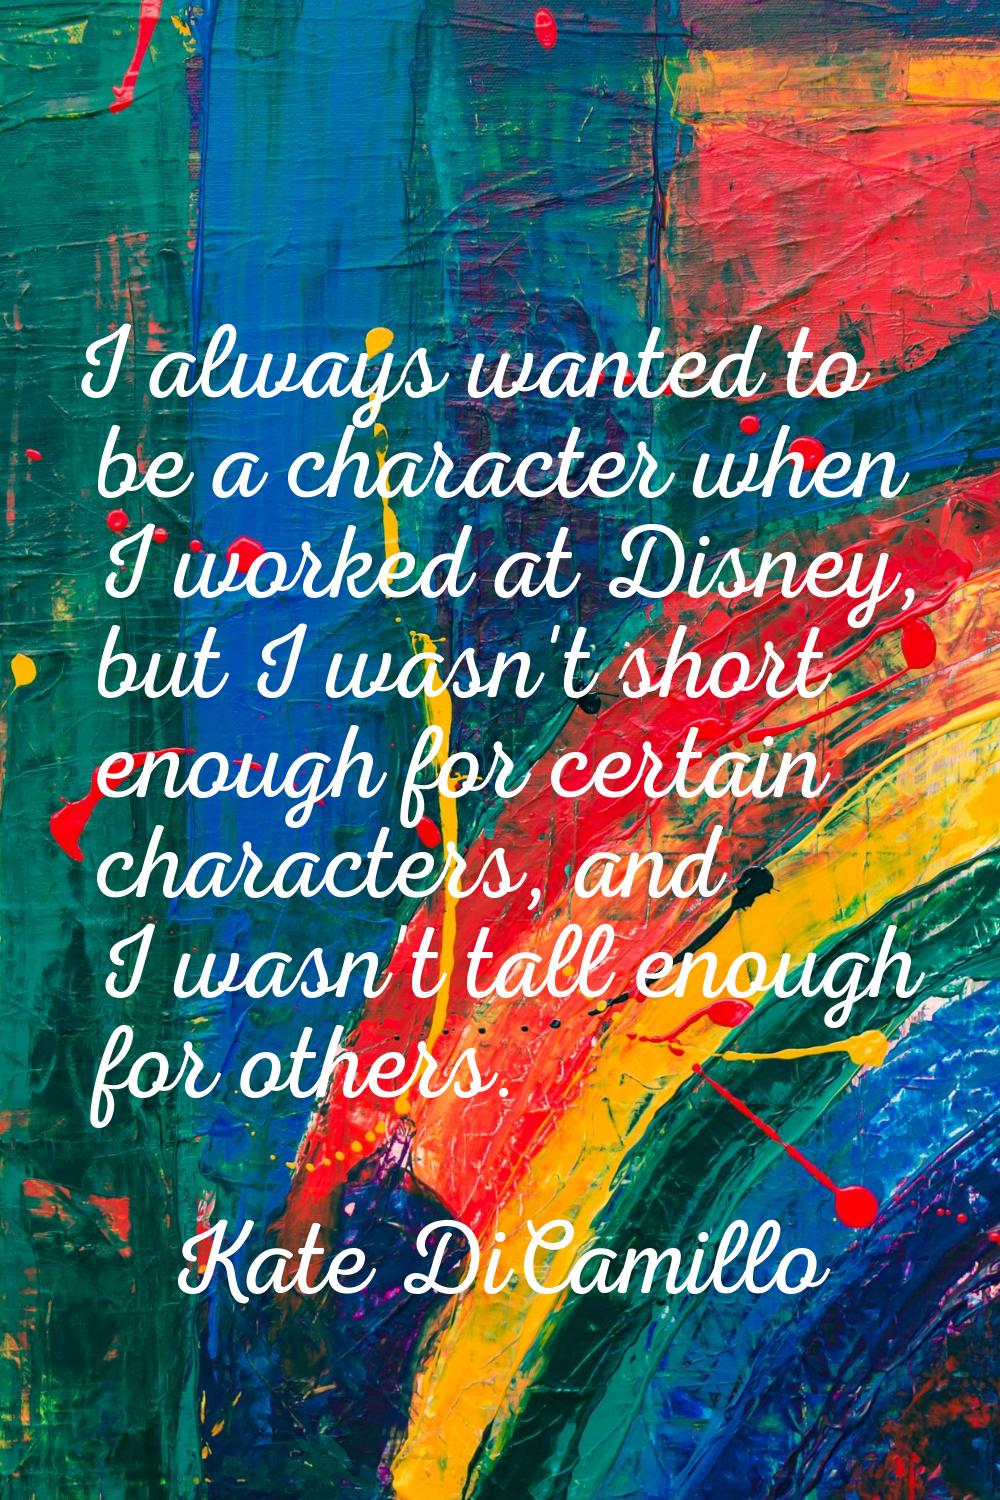 I always wanted to be a character when I worked at Disney, but I wasn't short enough for certain ch